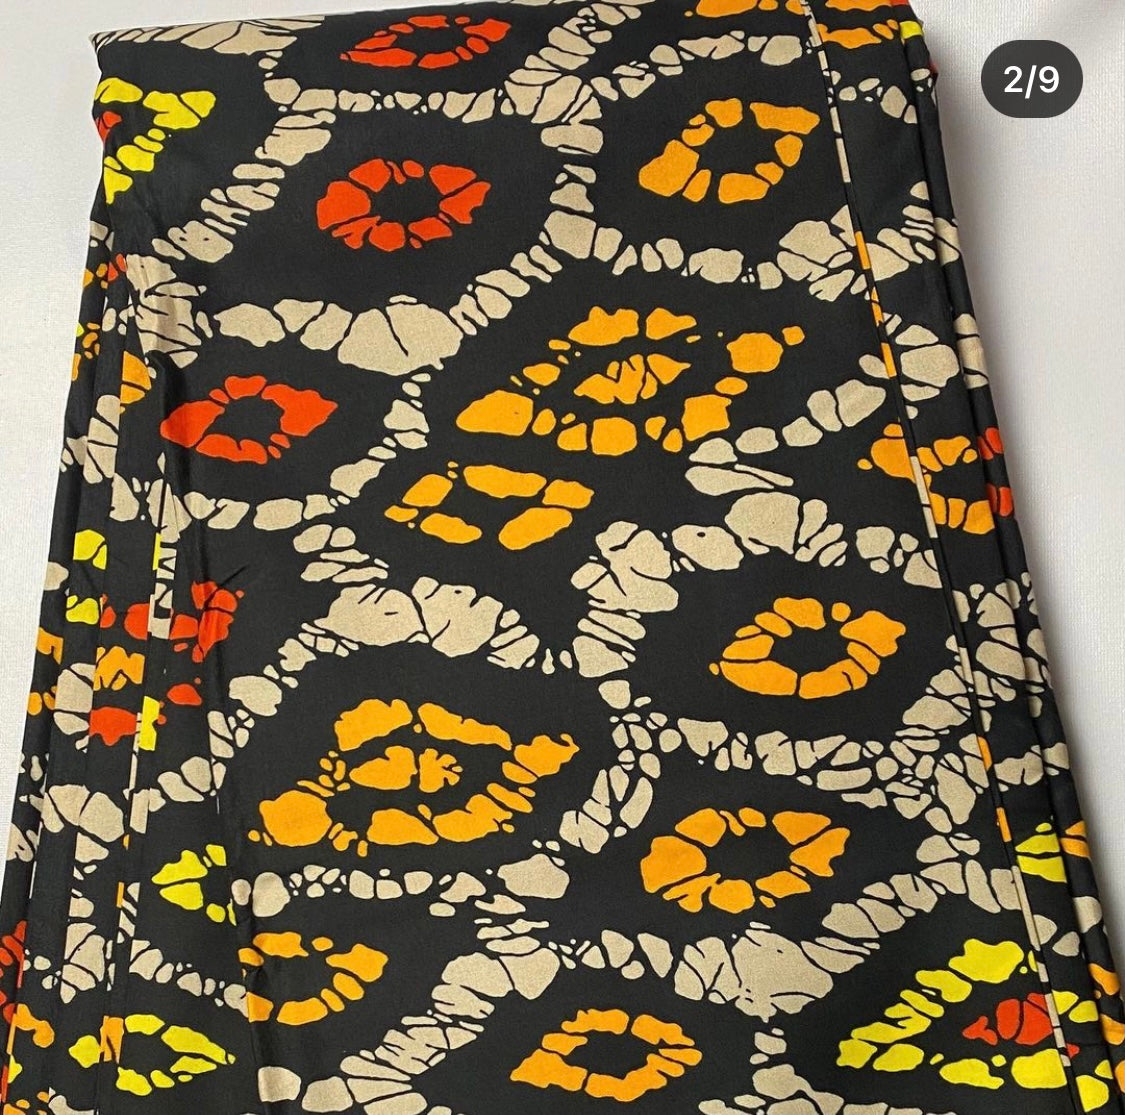 African cotton material 6yards